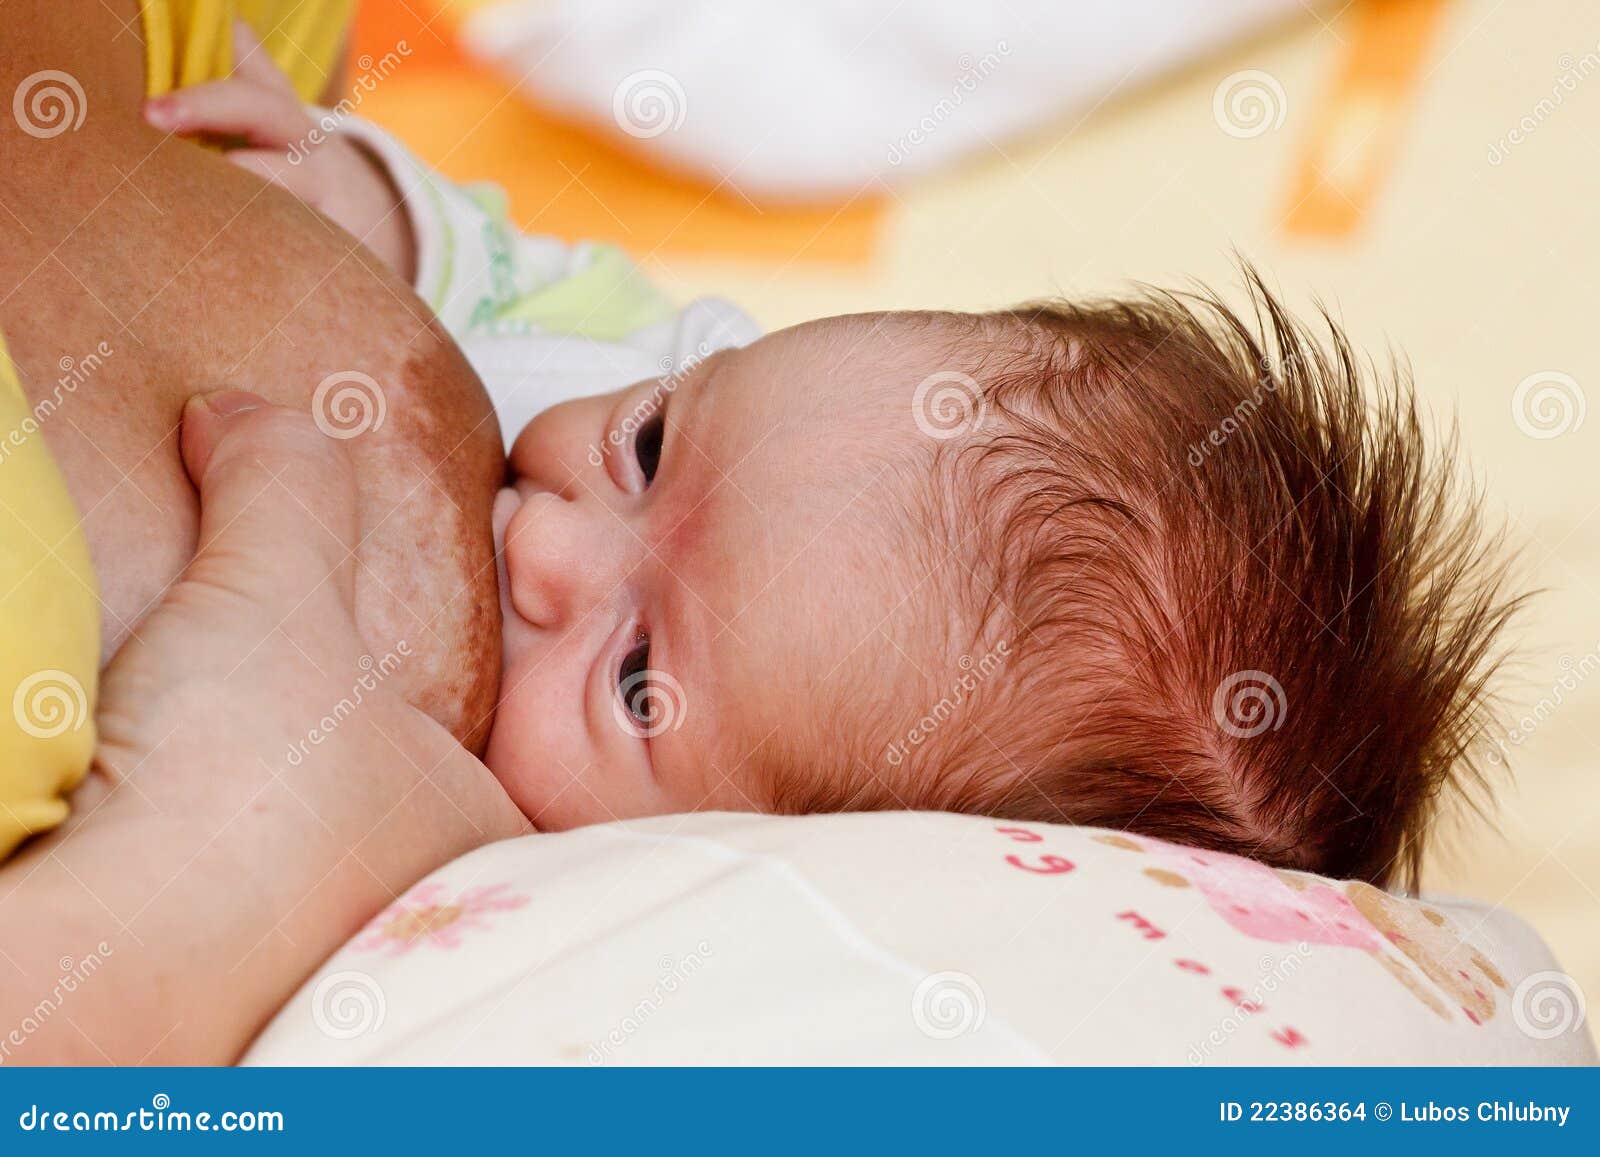 Sleeping Mom Boobs Sucking Porns - Baby Girl Sucking at Her Mother S Breast Stock Photo - Image of bosom,  baby: 22386364